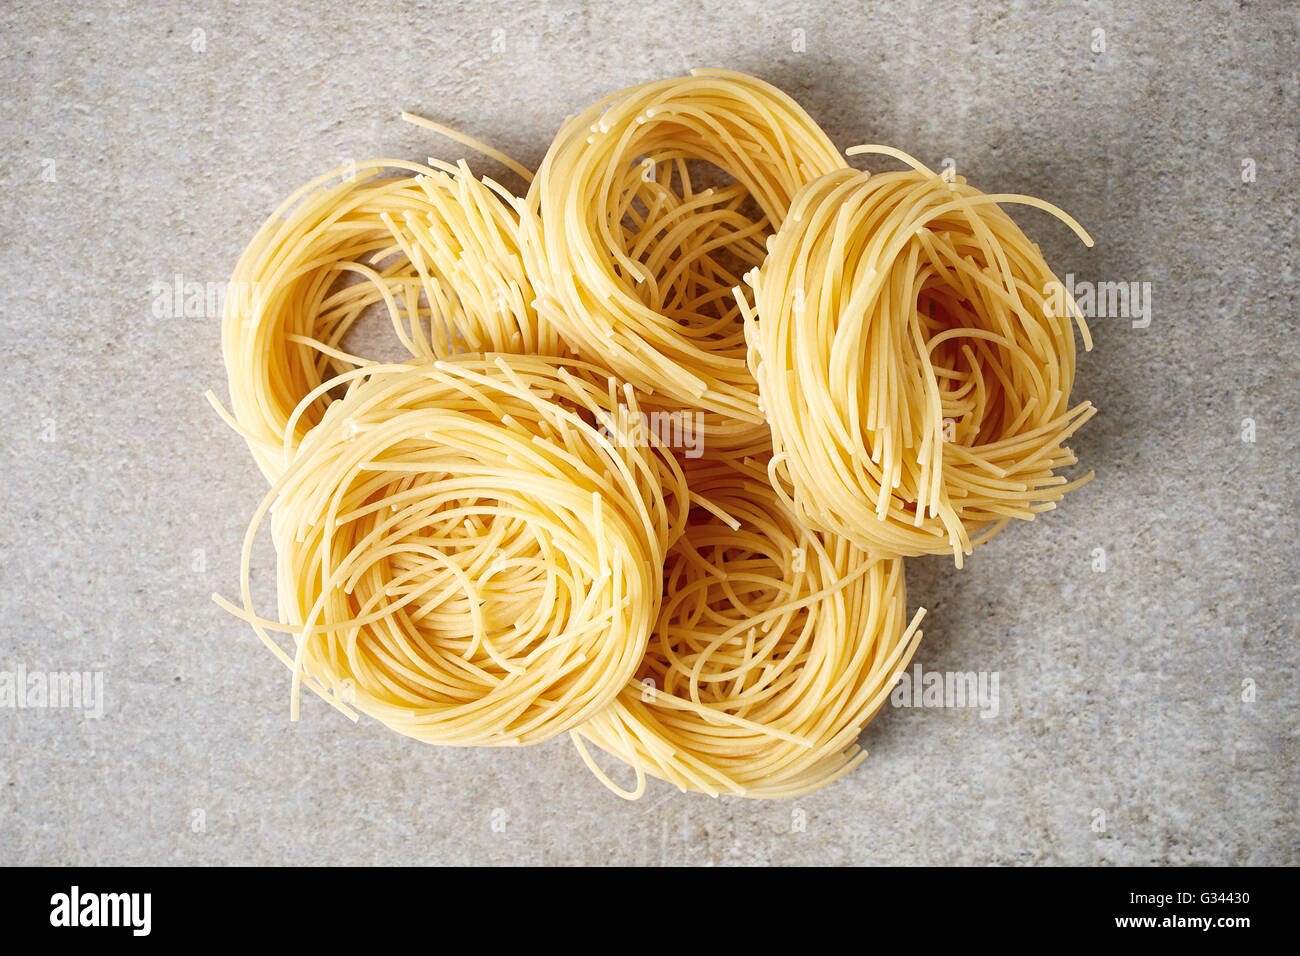 Egg pasta nest on stone table, top view Stock Photo